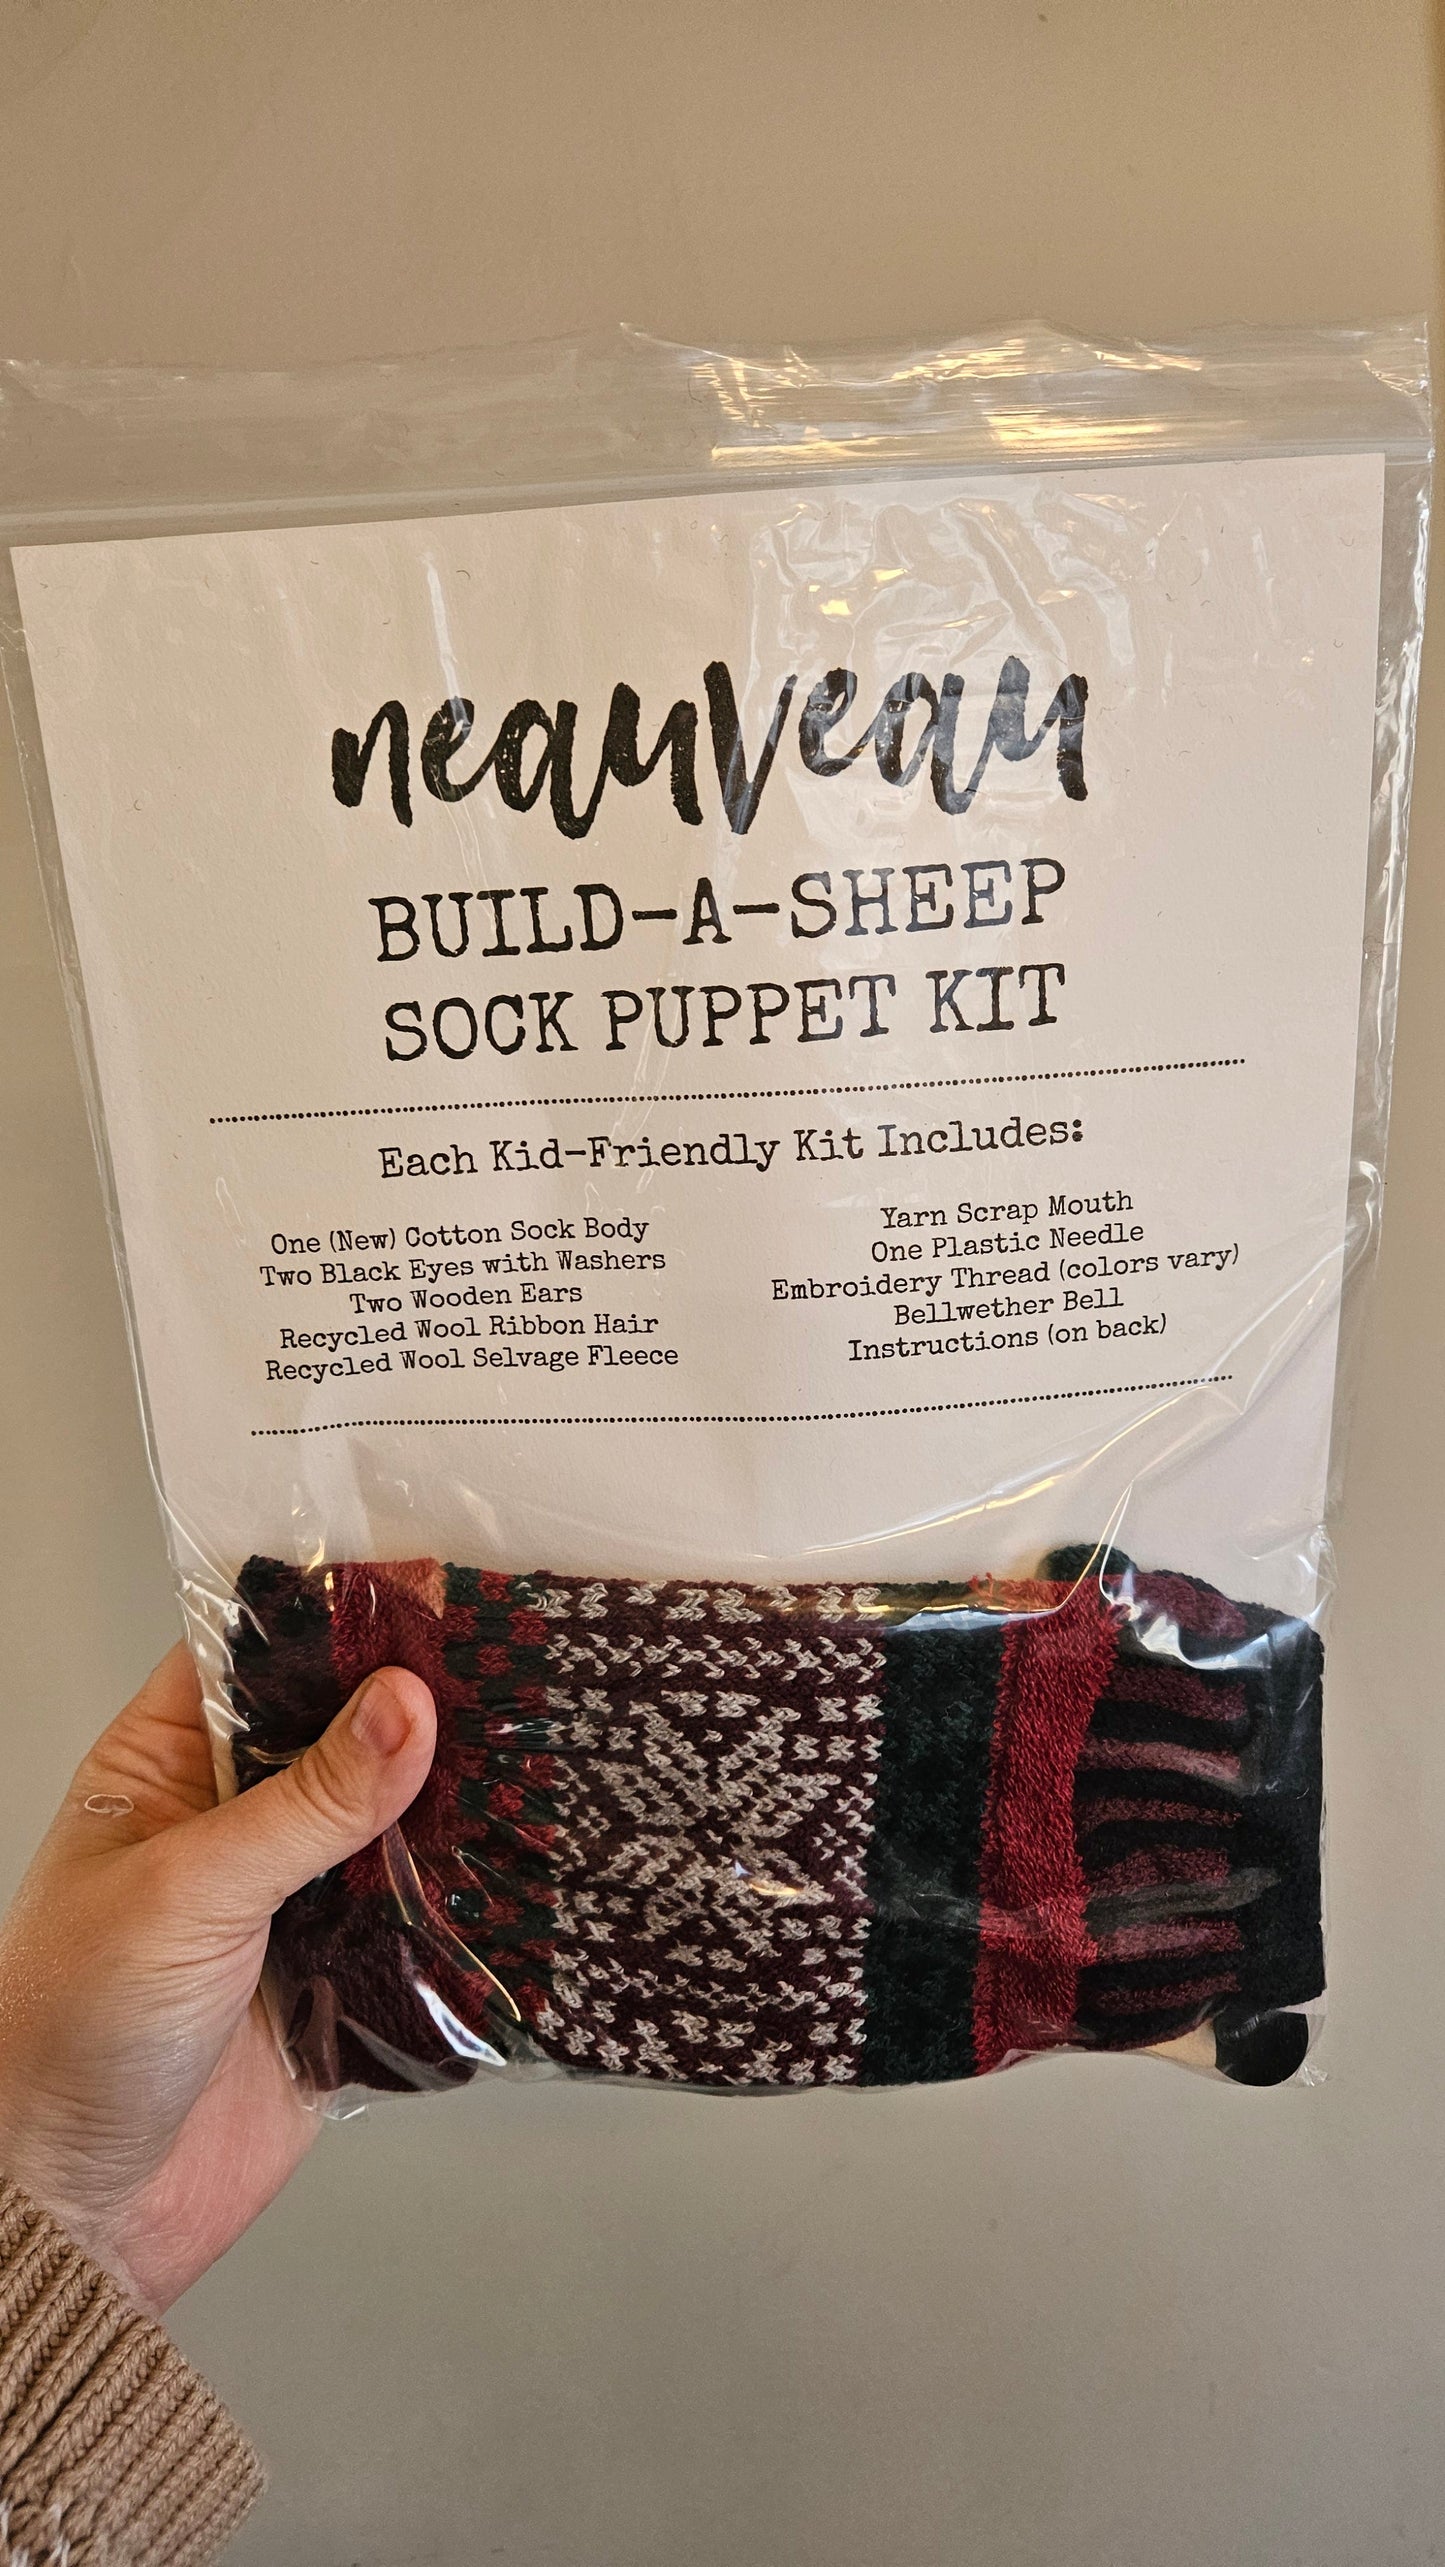 Build-A-Sheep Solmate Sock Puppet Kit - Heritage Sheep